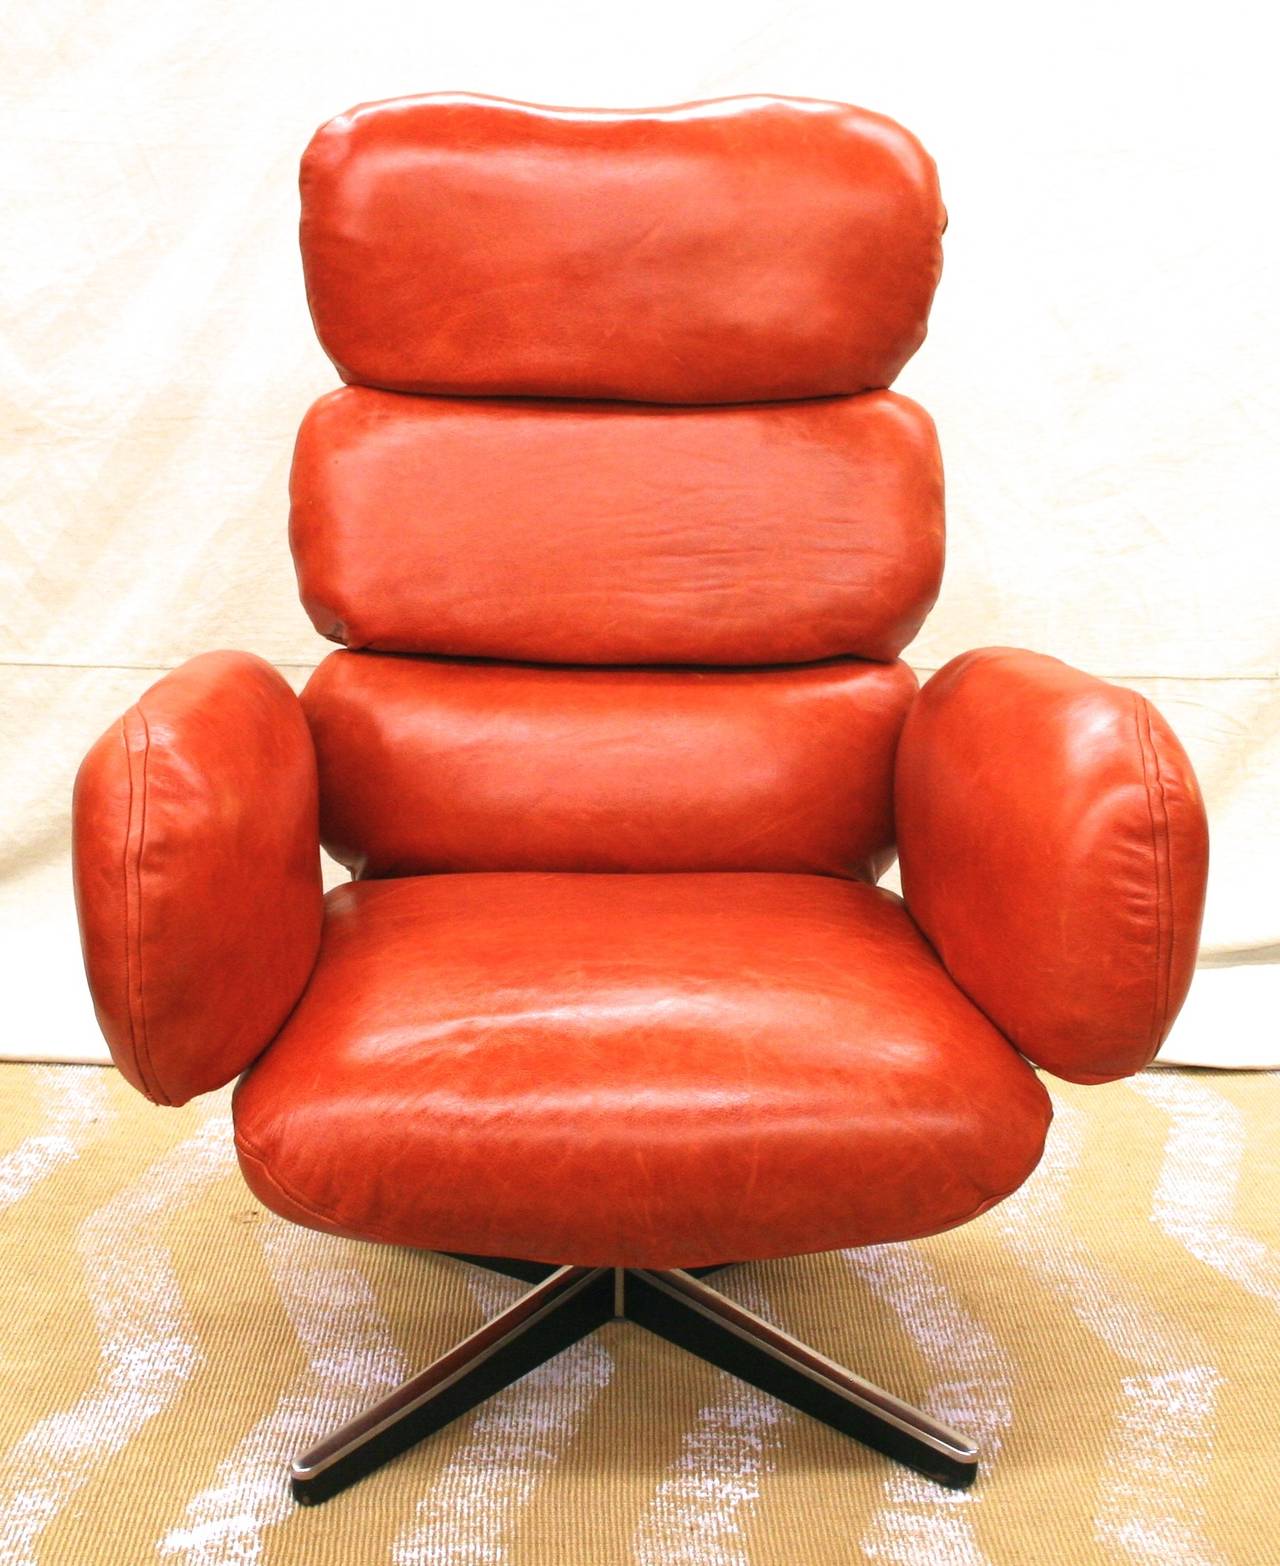 American Mid-Century Modern Executive Desk Chair by Otto Zapf for Knoll, circa 1970s